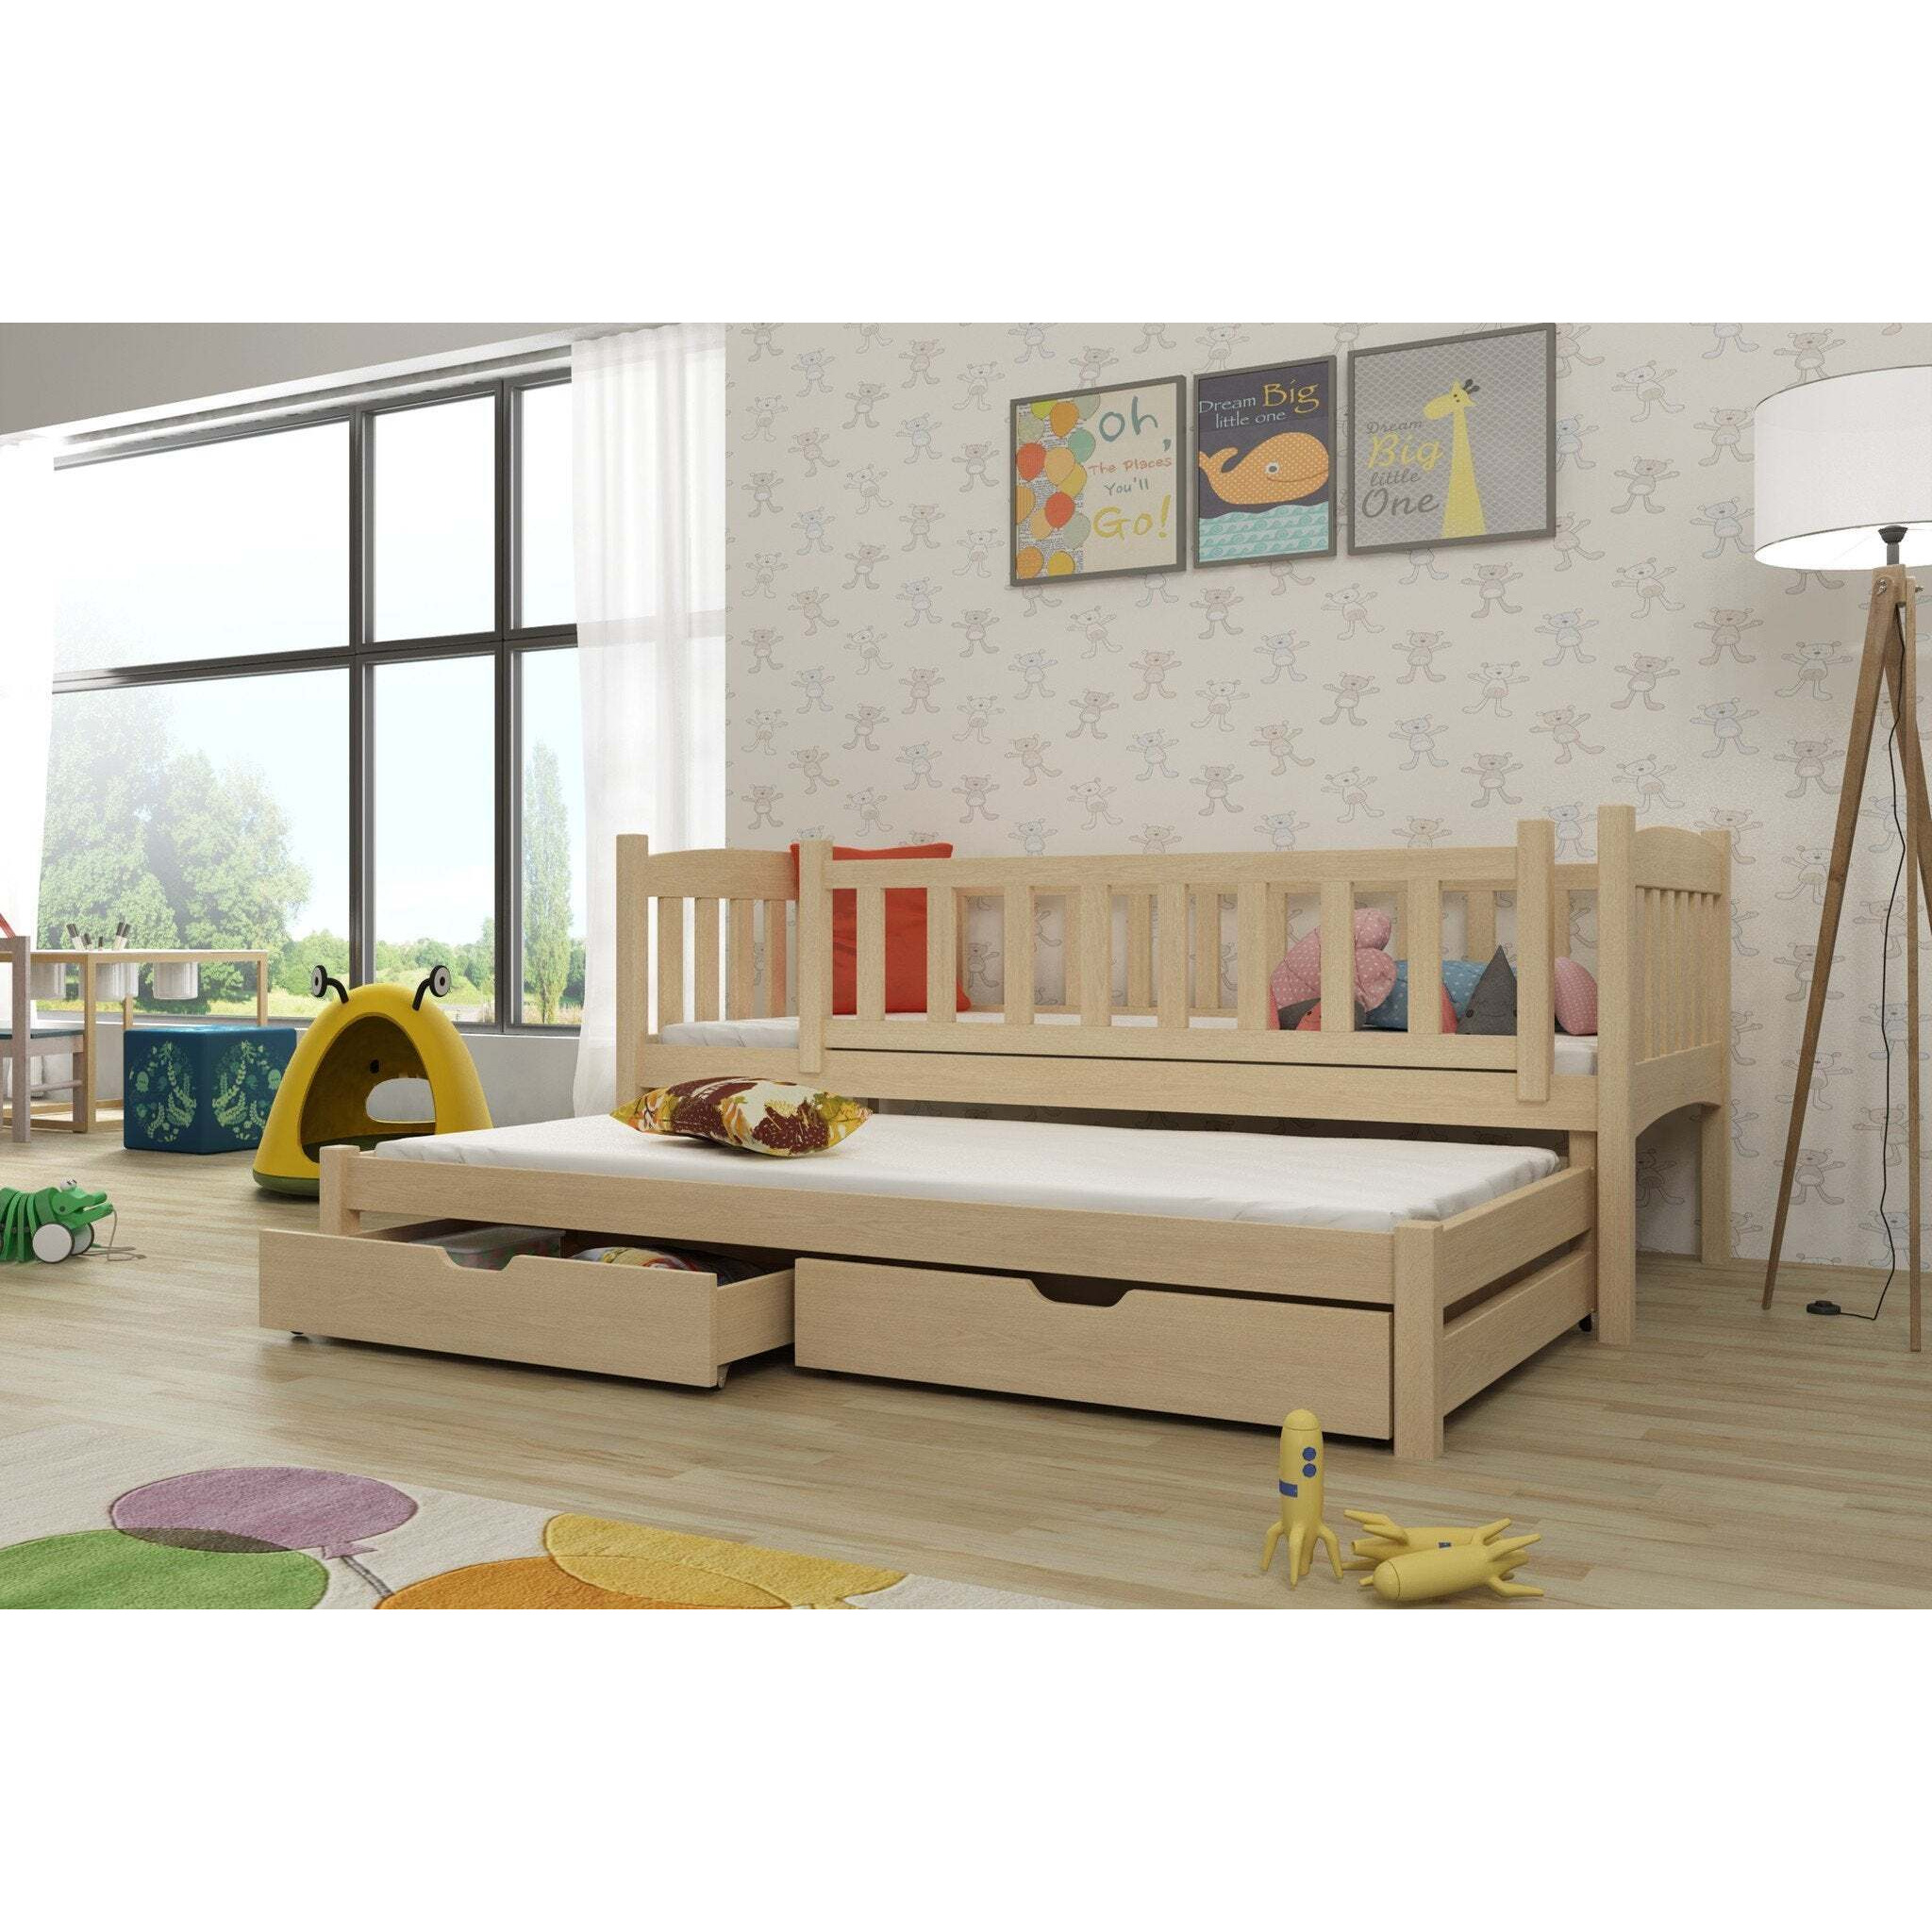 Amelka Double Bed with Trundle - Pine Foam Mattresses - image 1